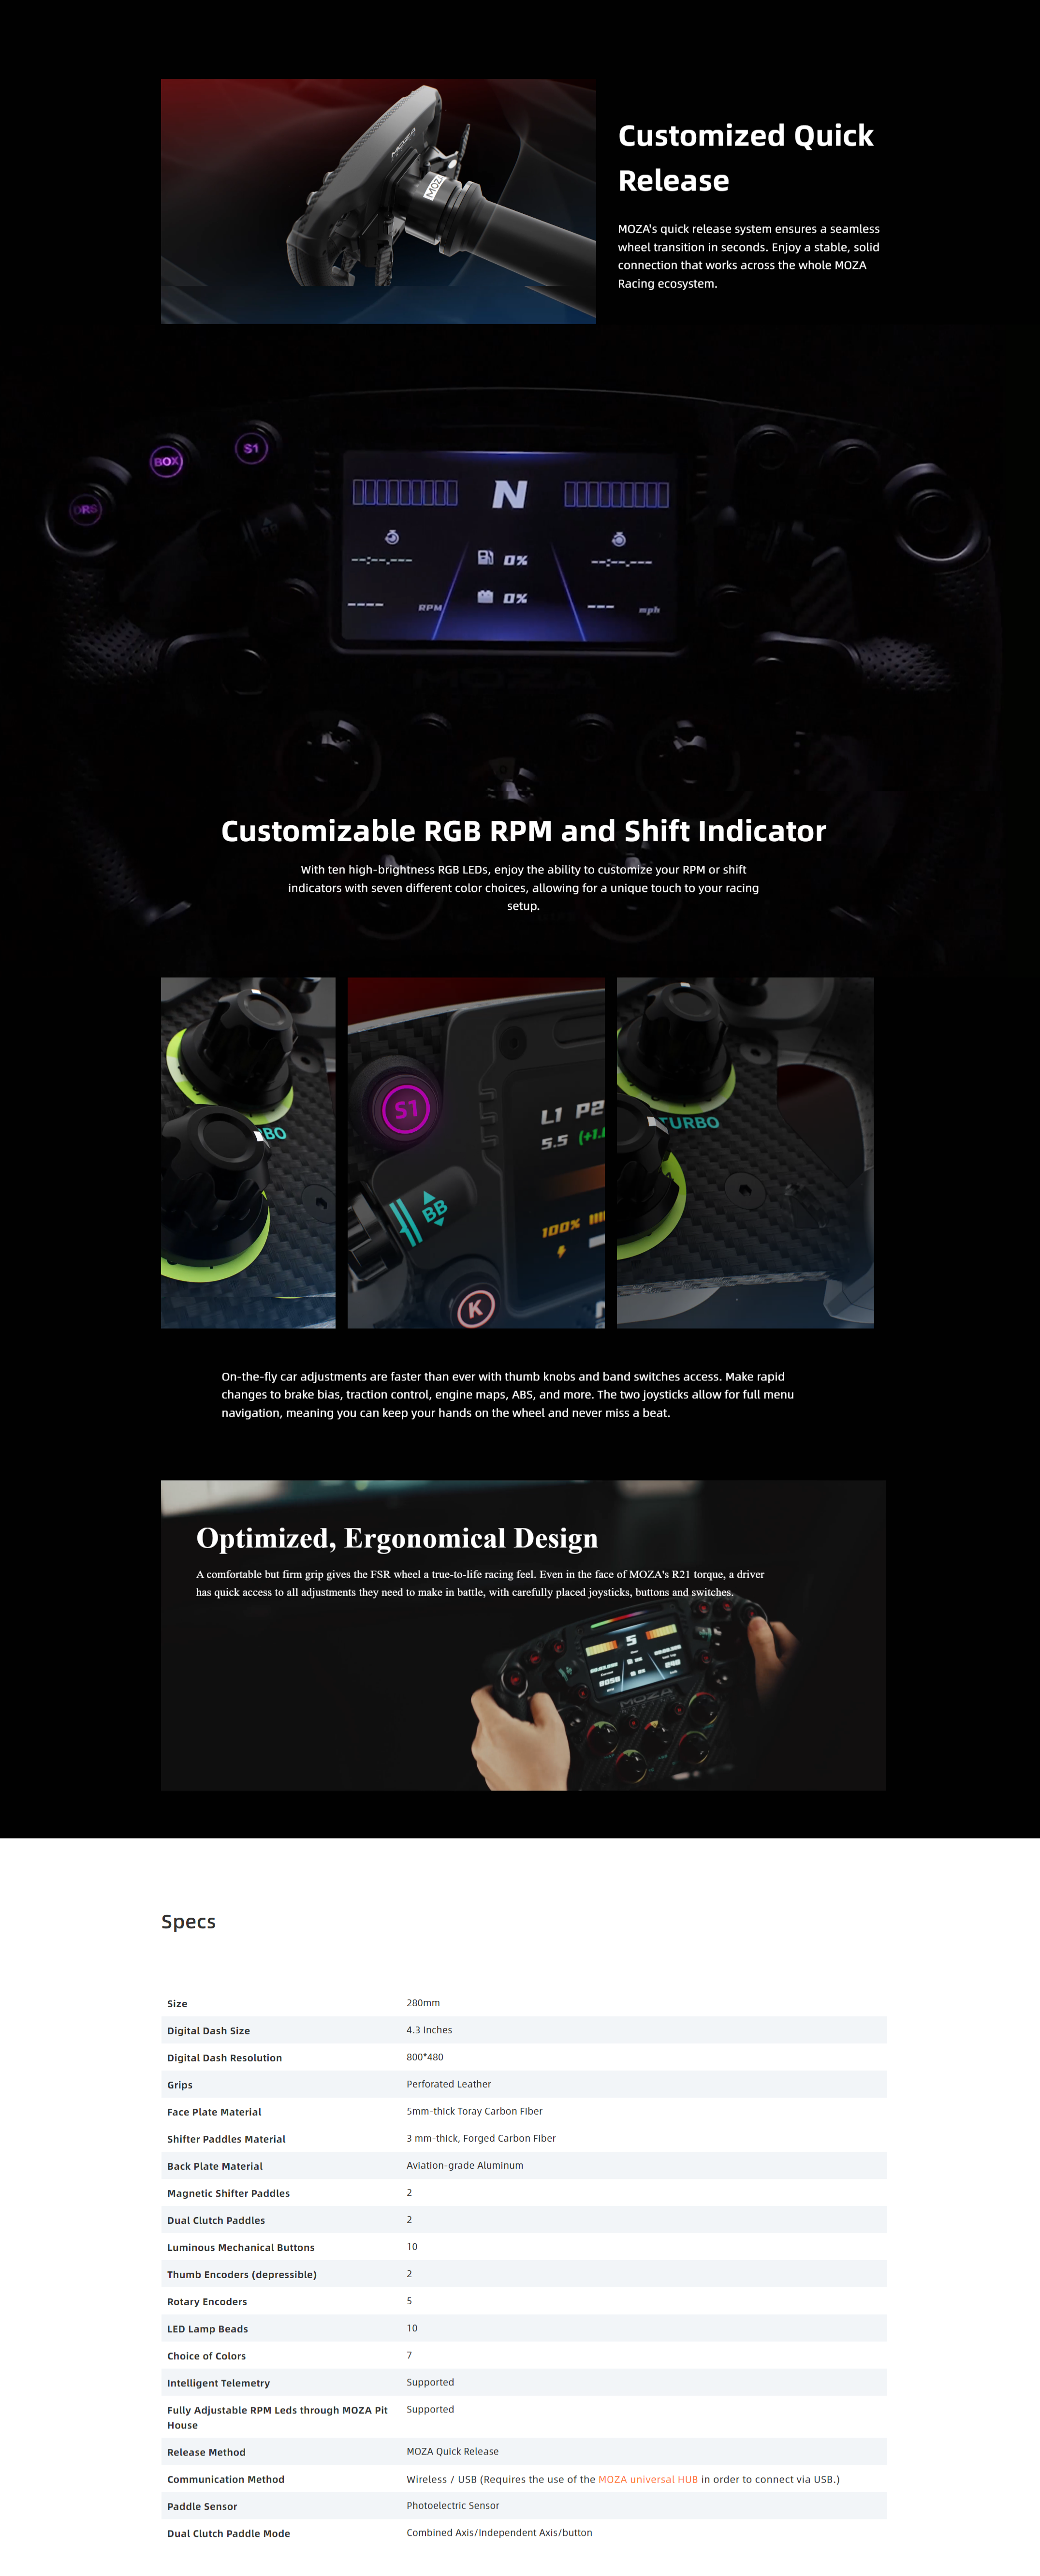 A large marketing image providing additional information about the product MOZA FSR Steering Wheel - Additional alt info not provided